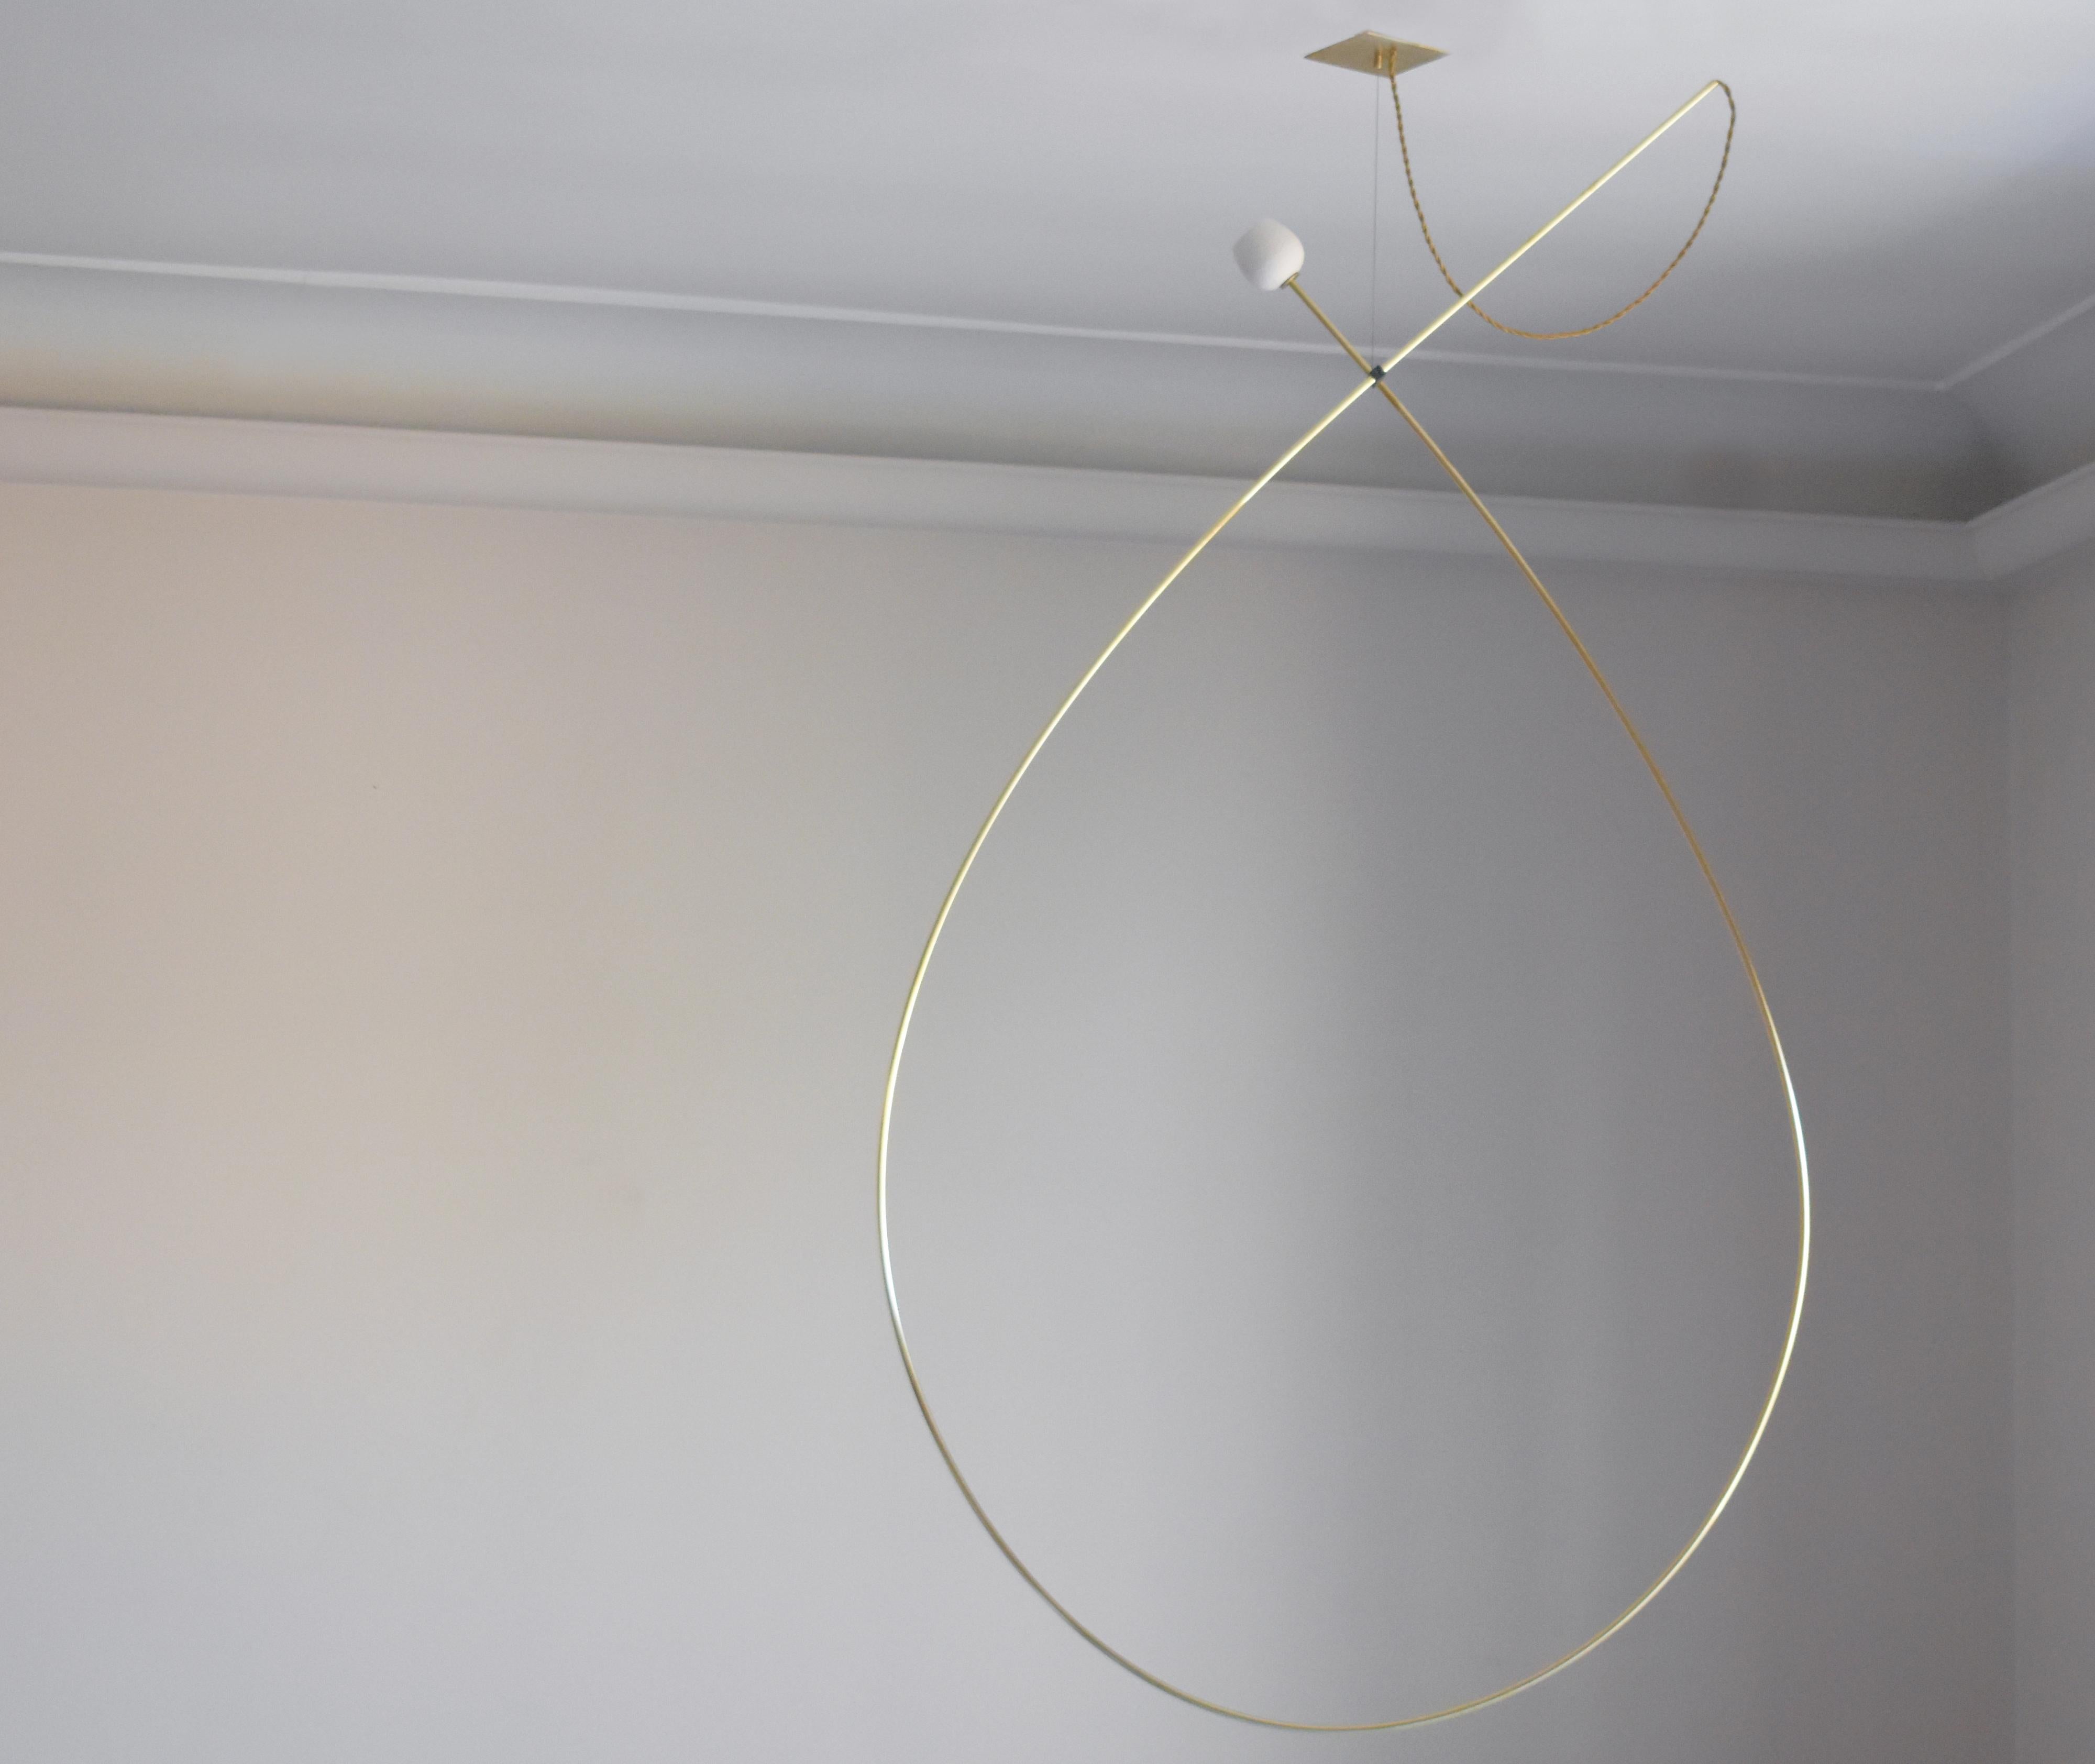 Drops Brass Hanging Light Object by Periclis Frementitis
One of a Kind.
Dimensions: D 70 x H 160 cm. 
Materials: Polished and oxidized brass, porcelain, G4 LED bulb.

Due to the handmade nature of the piece, dimensions may vary up to 10%
for